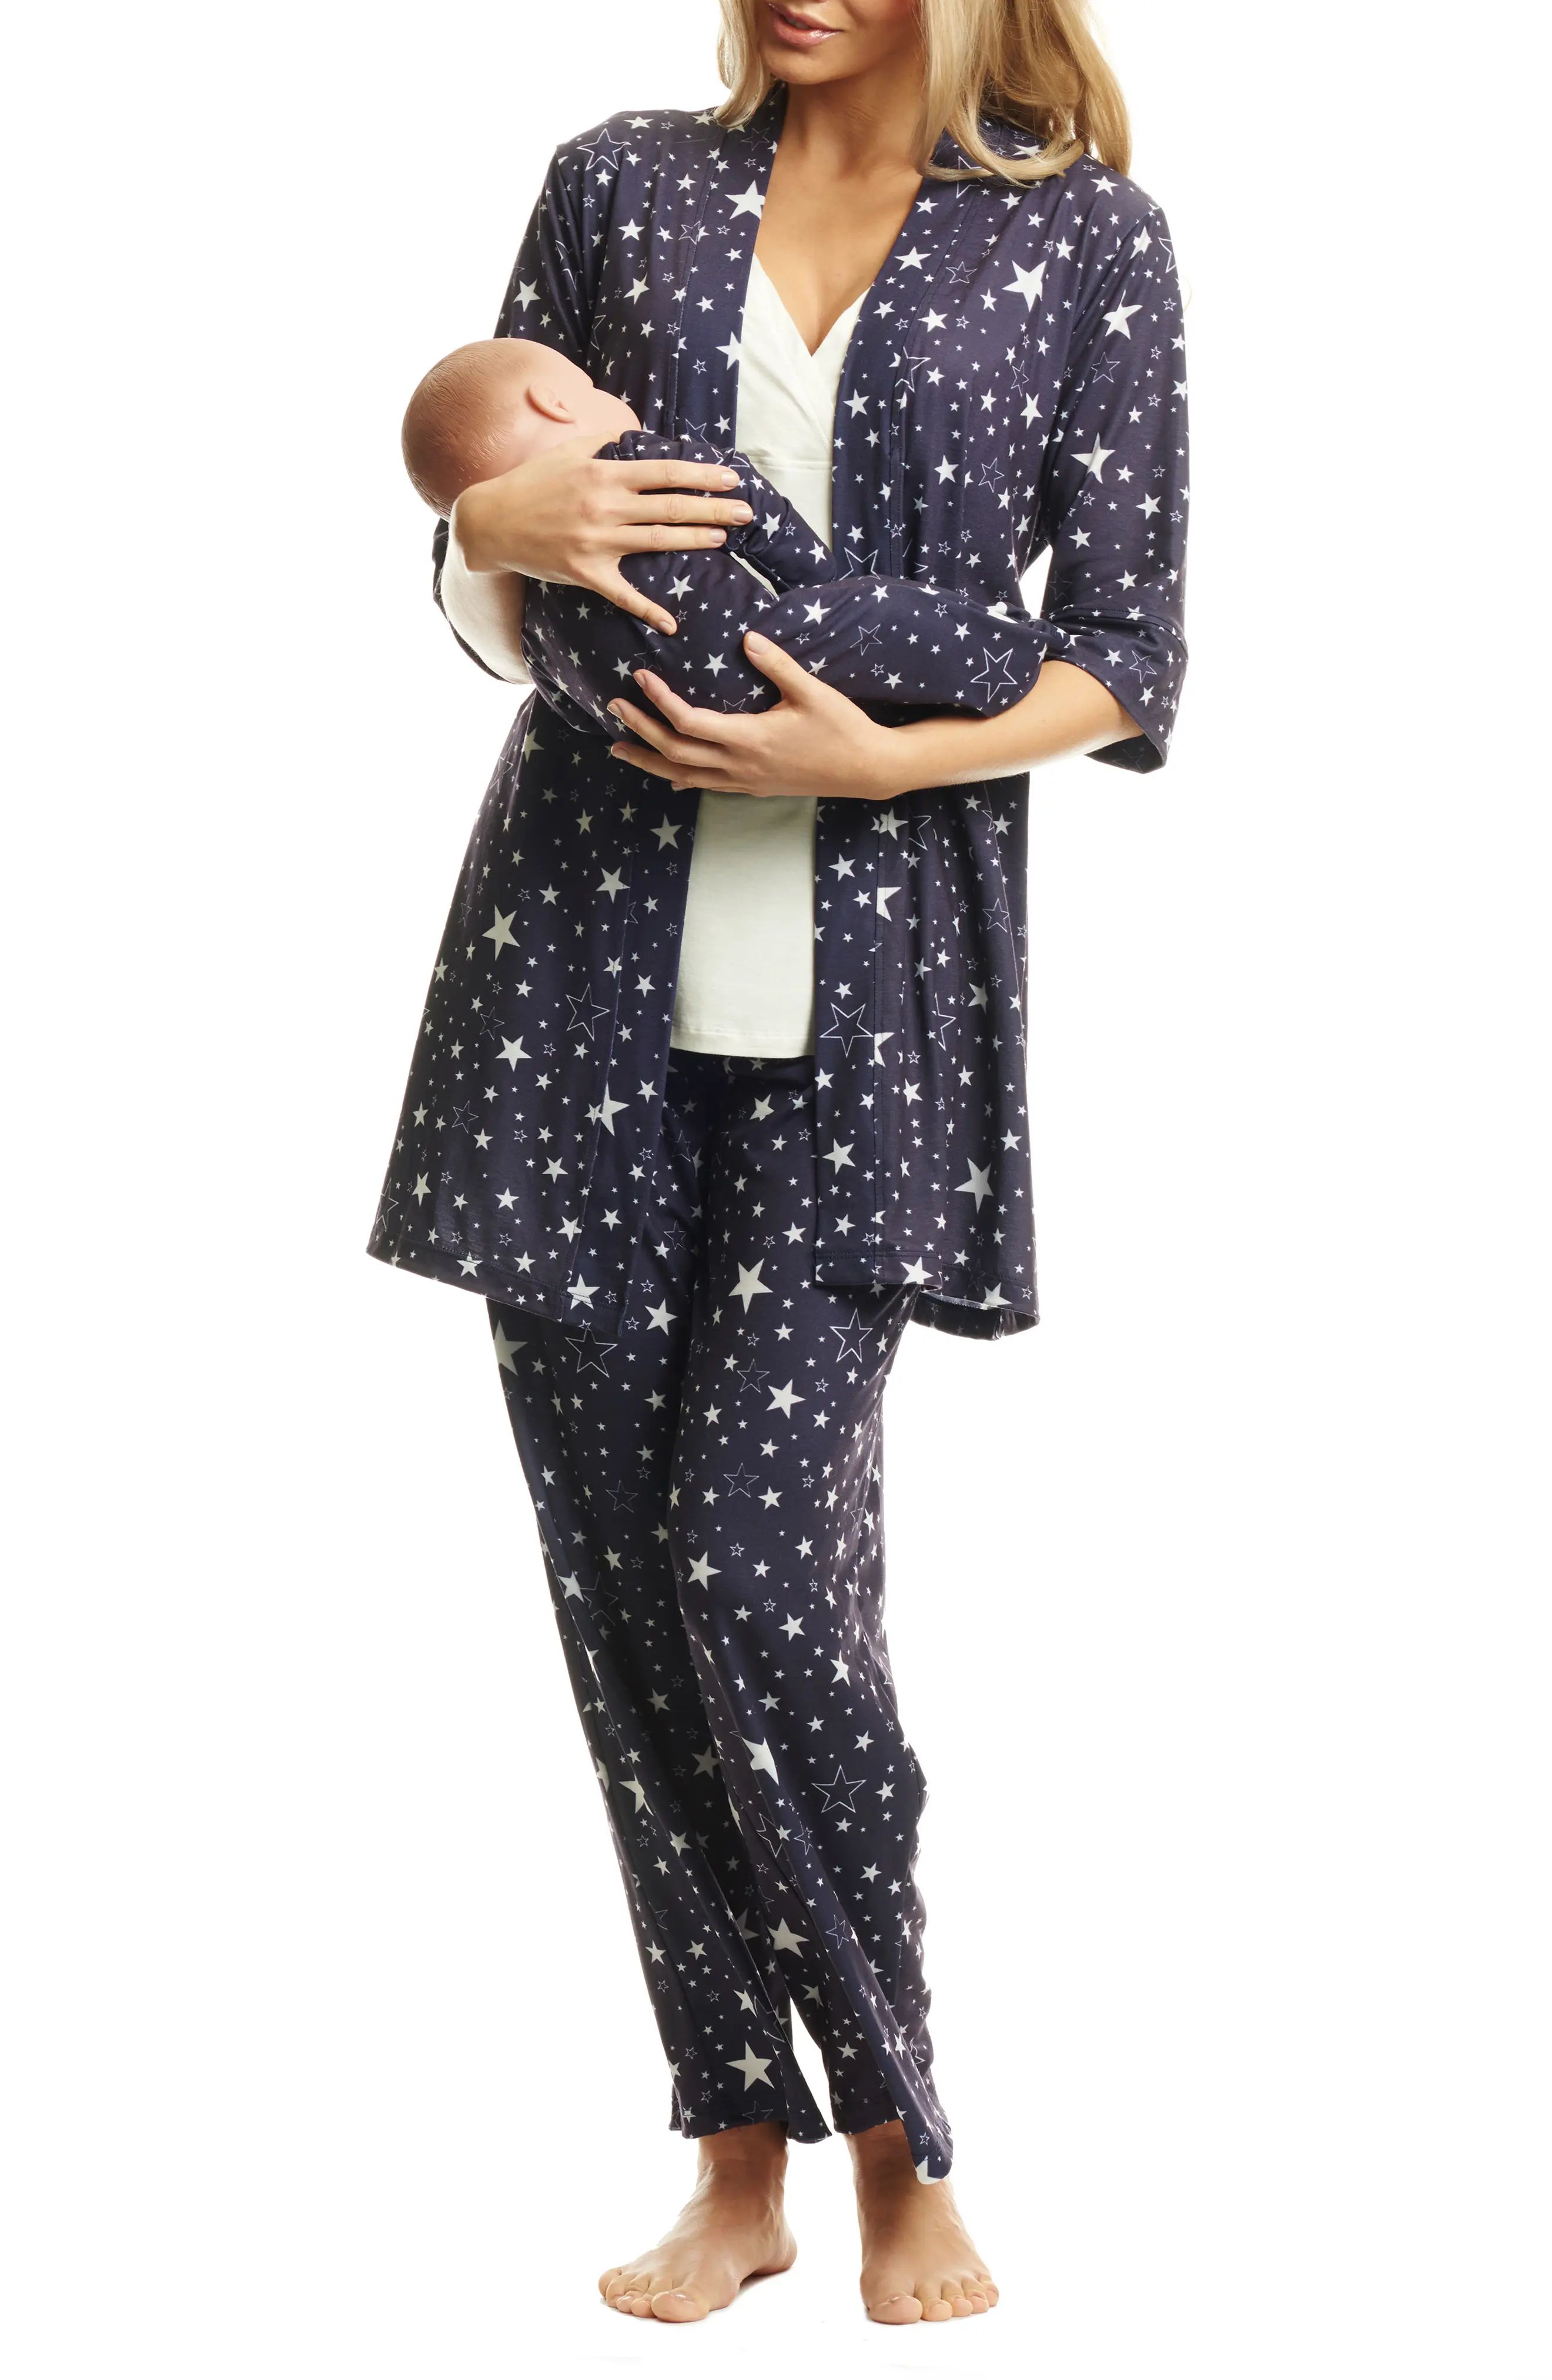 Everly Grey Analise During & After 5-Piece Maternity/Nursing Sleep Set | Nordstrom